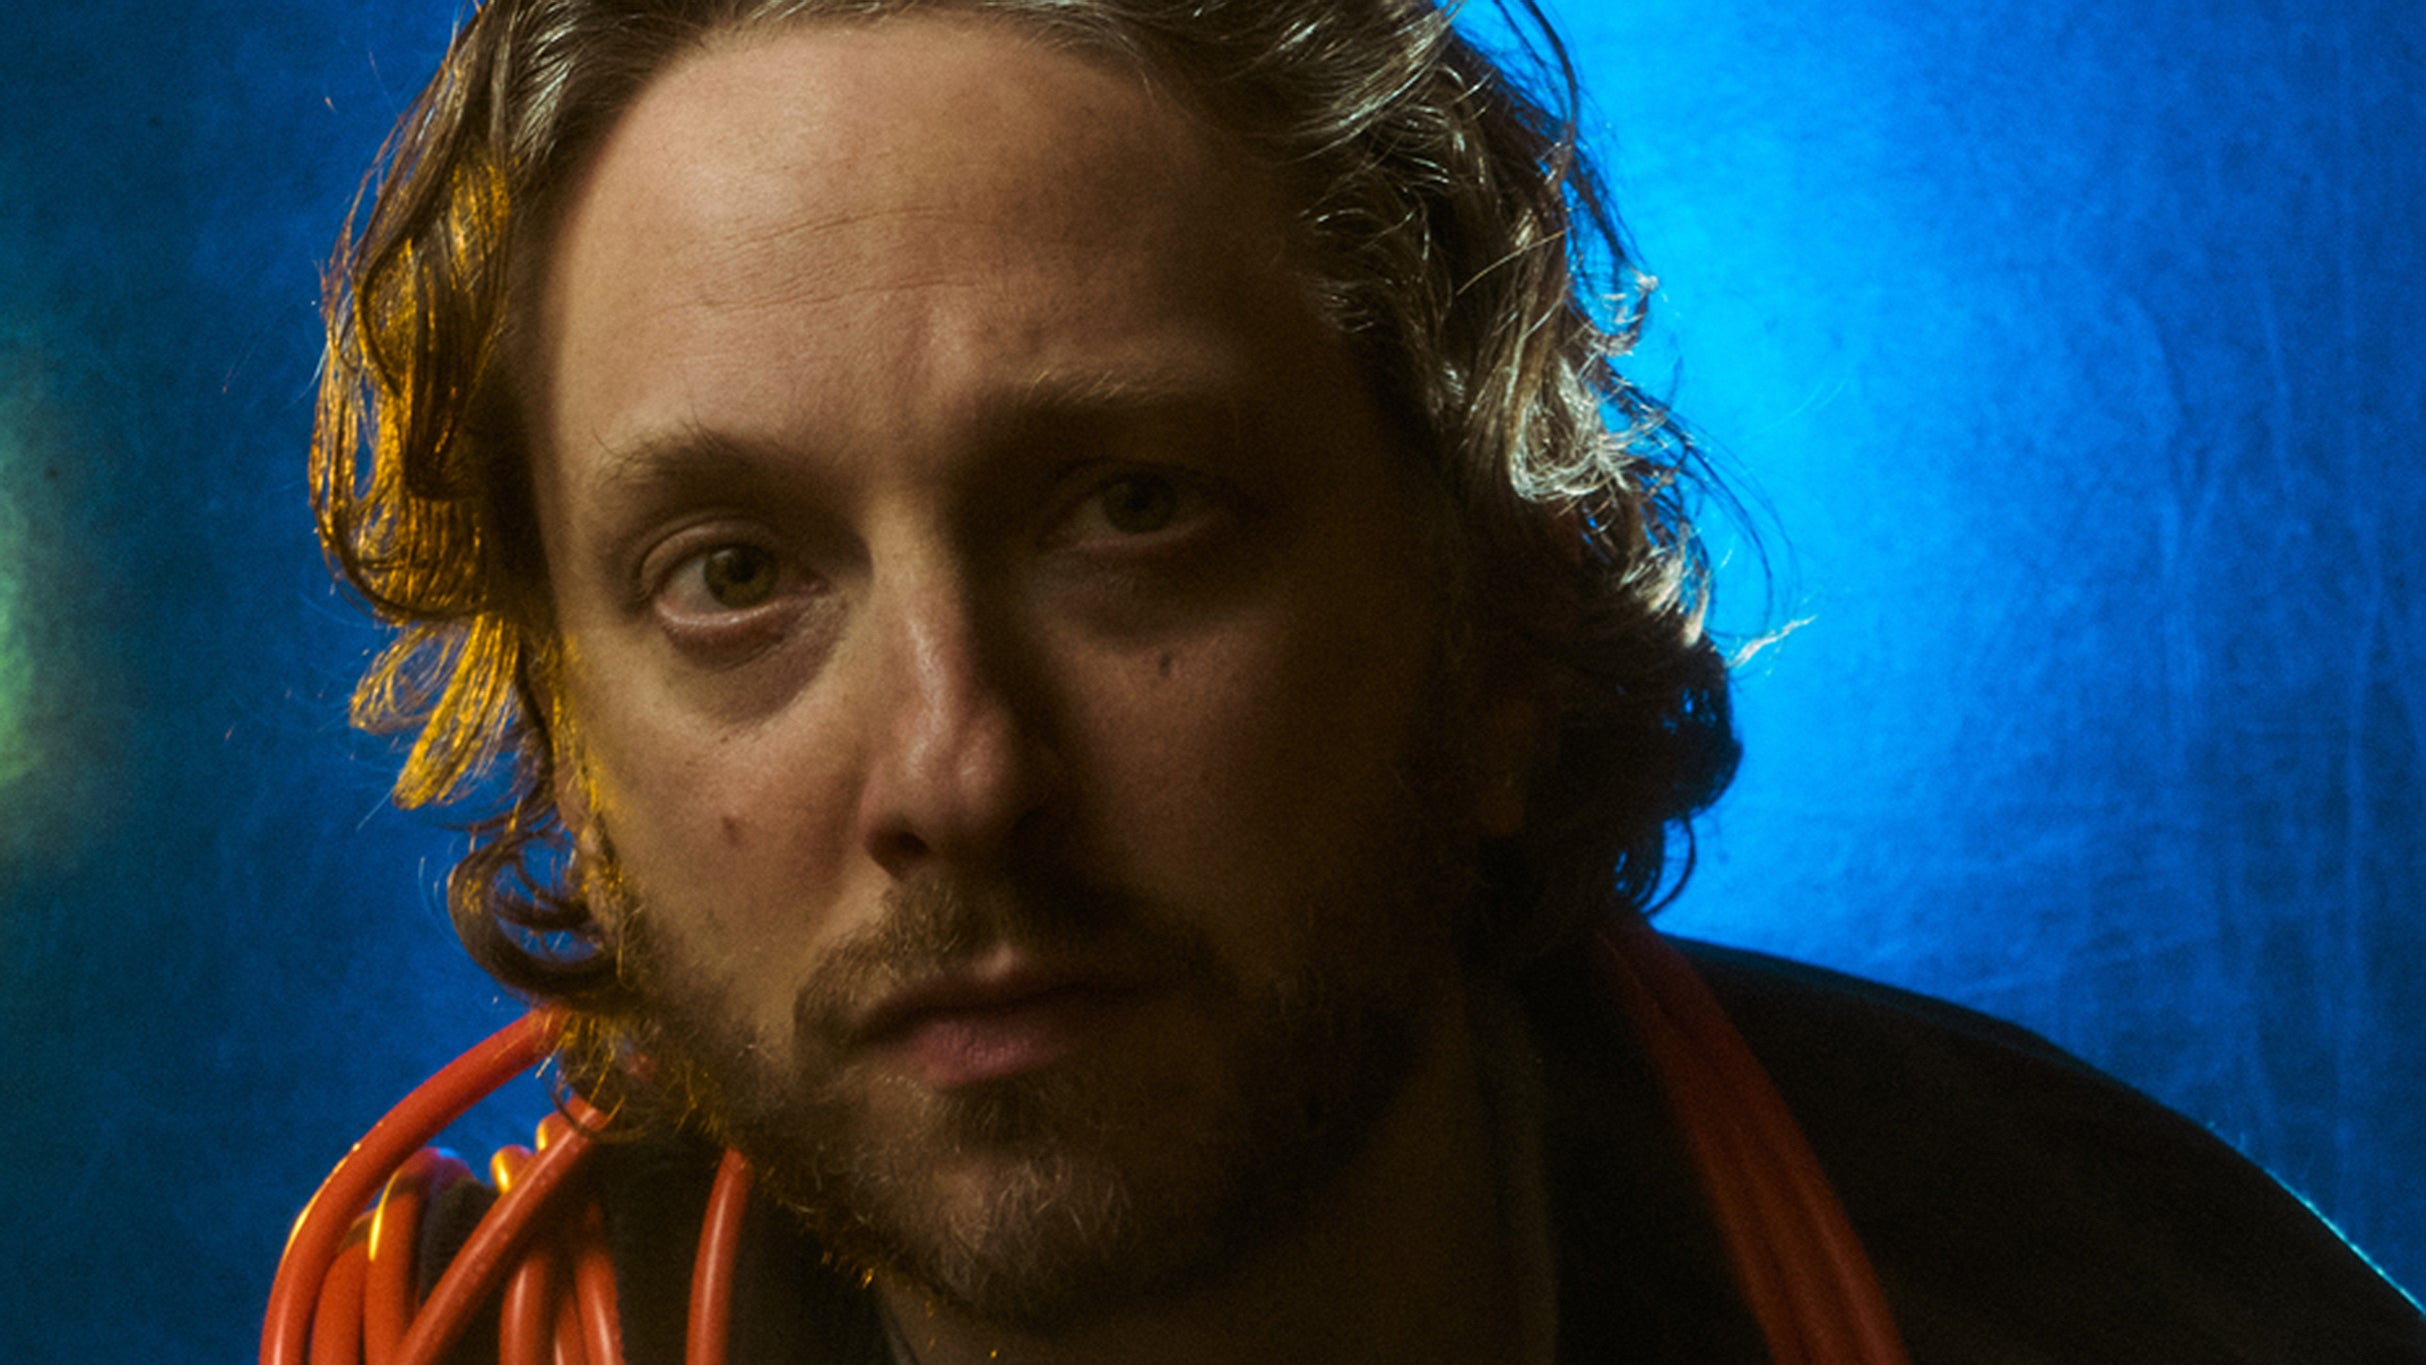 exclusive presale password to Oneohtrix Point Never face value tickets in Seattle